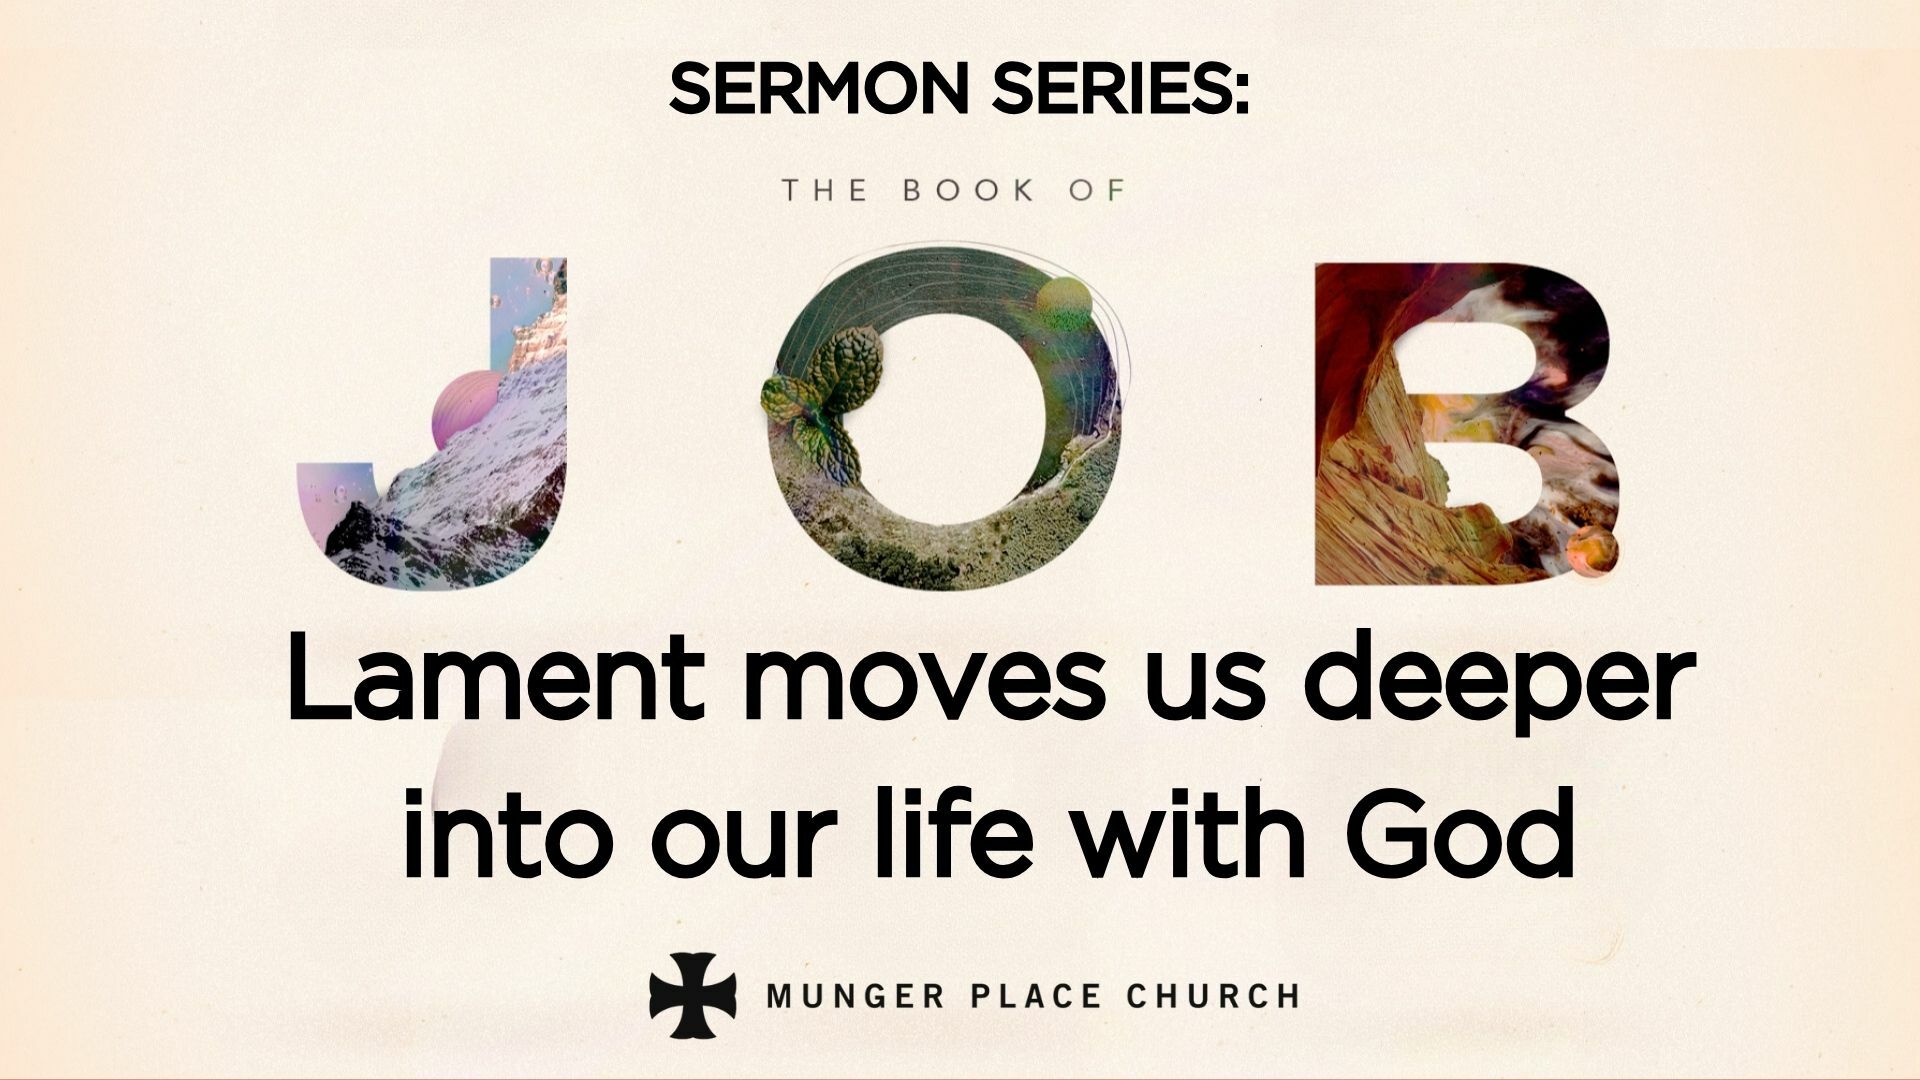 Lament moves us deeper into our life with God Youtube Thumbnail